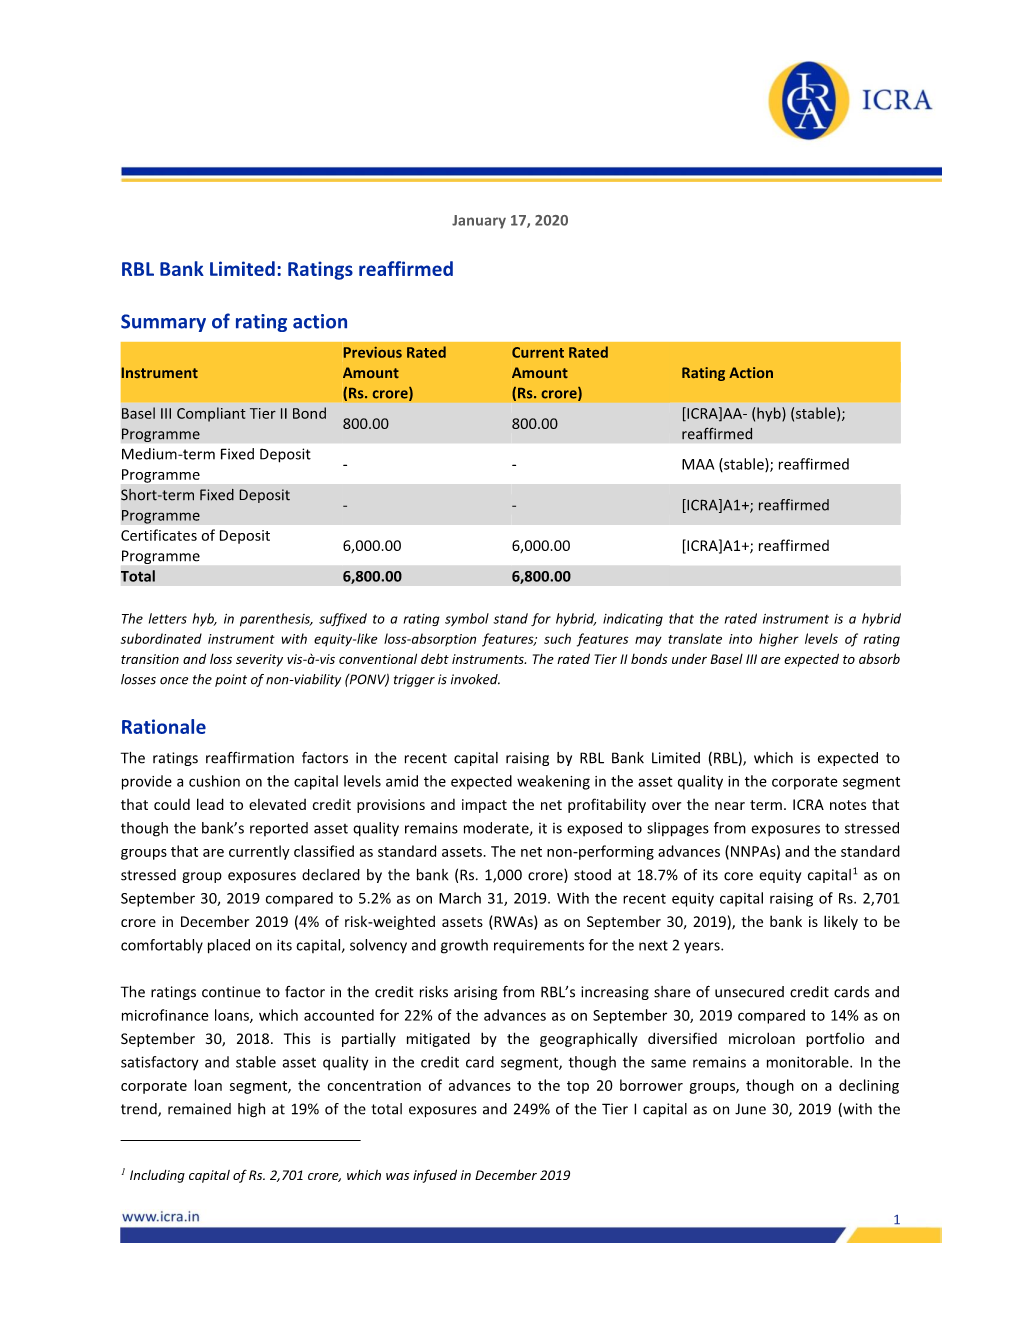 RBL Bank Limited: Ratings Reaffirmed